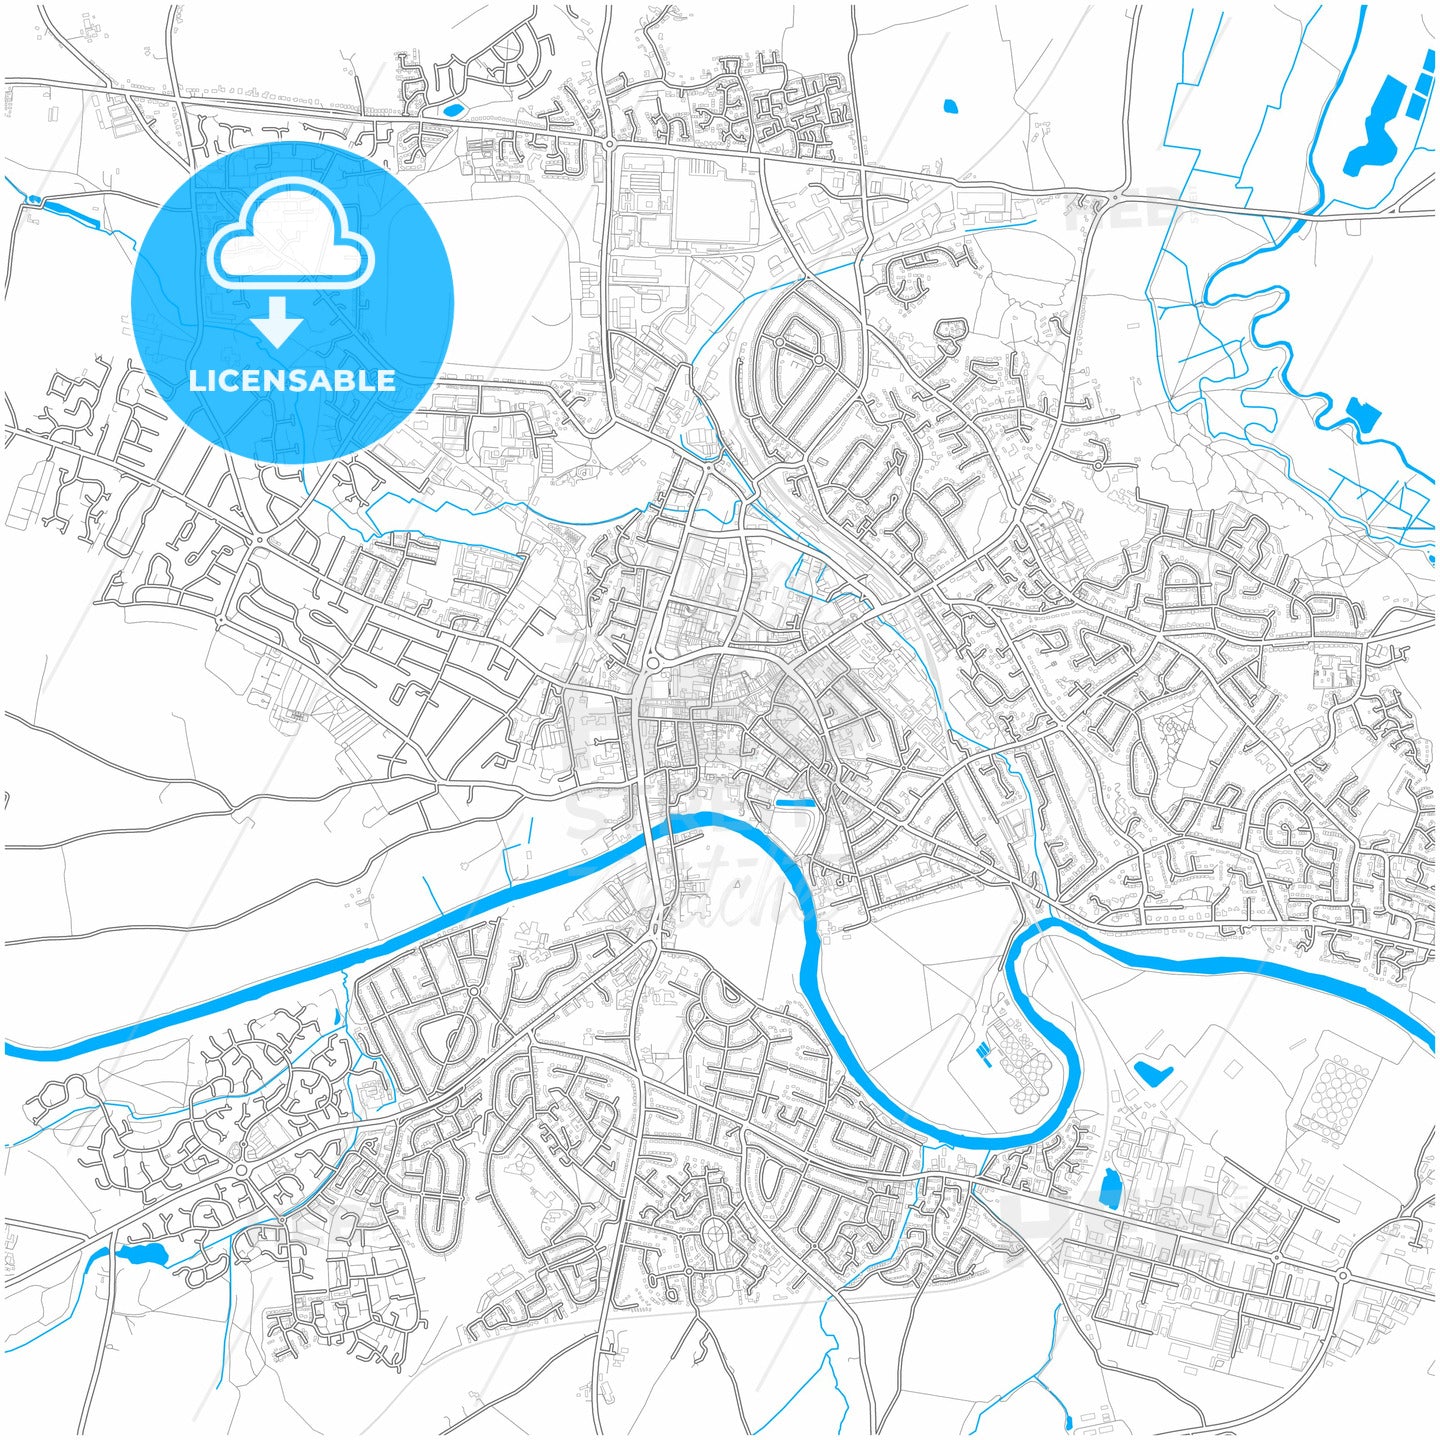 Hereford, West Midlands, England, city map with high quality roads.